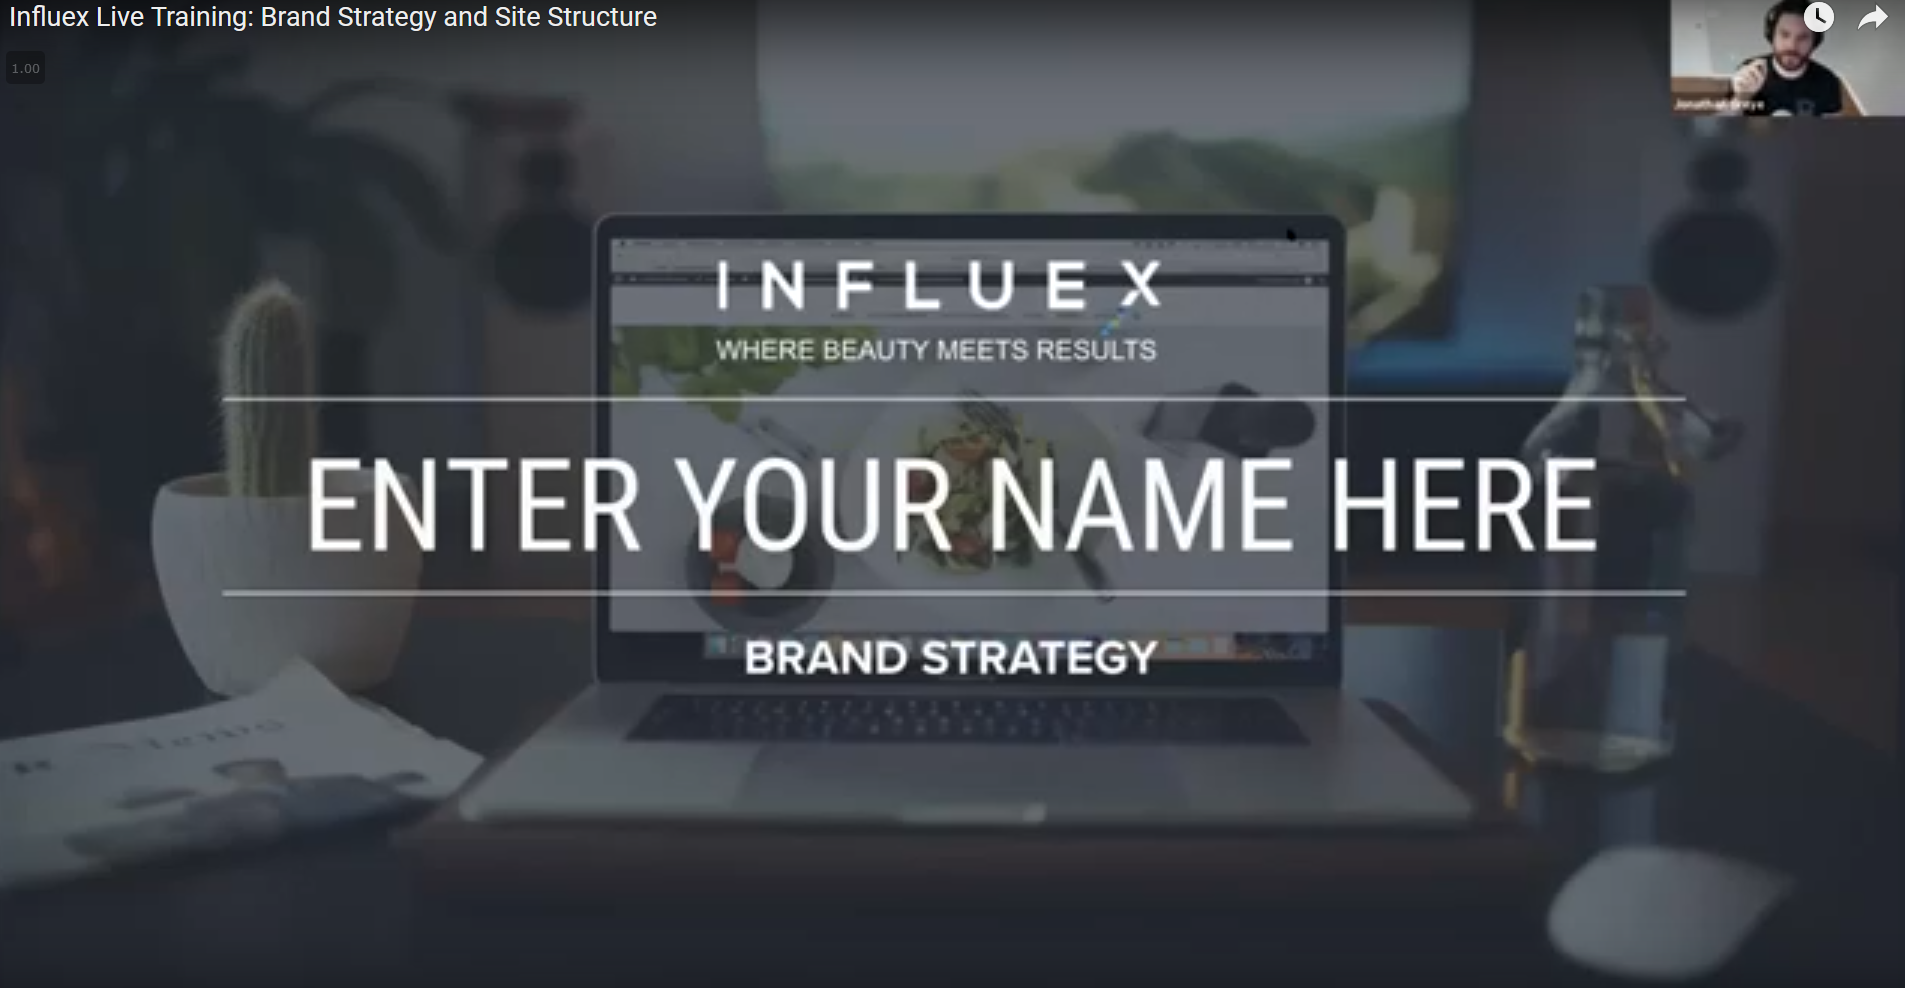 [Live Training] Brand Strategy and Site Structure